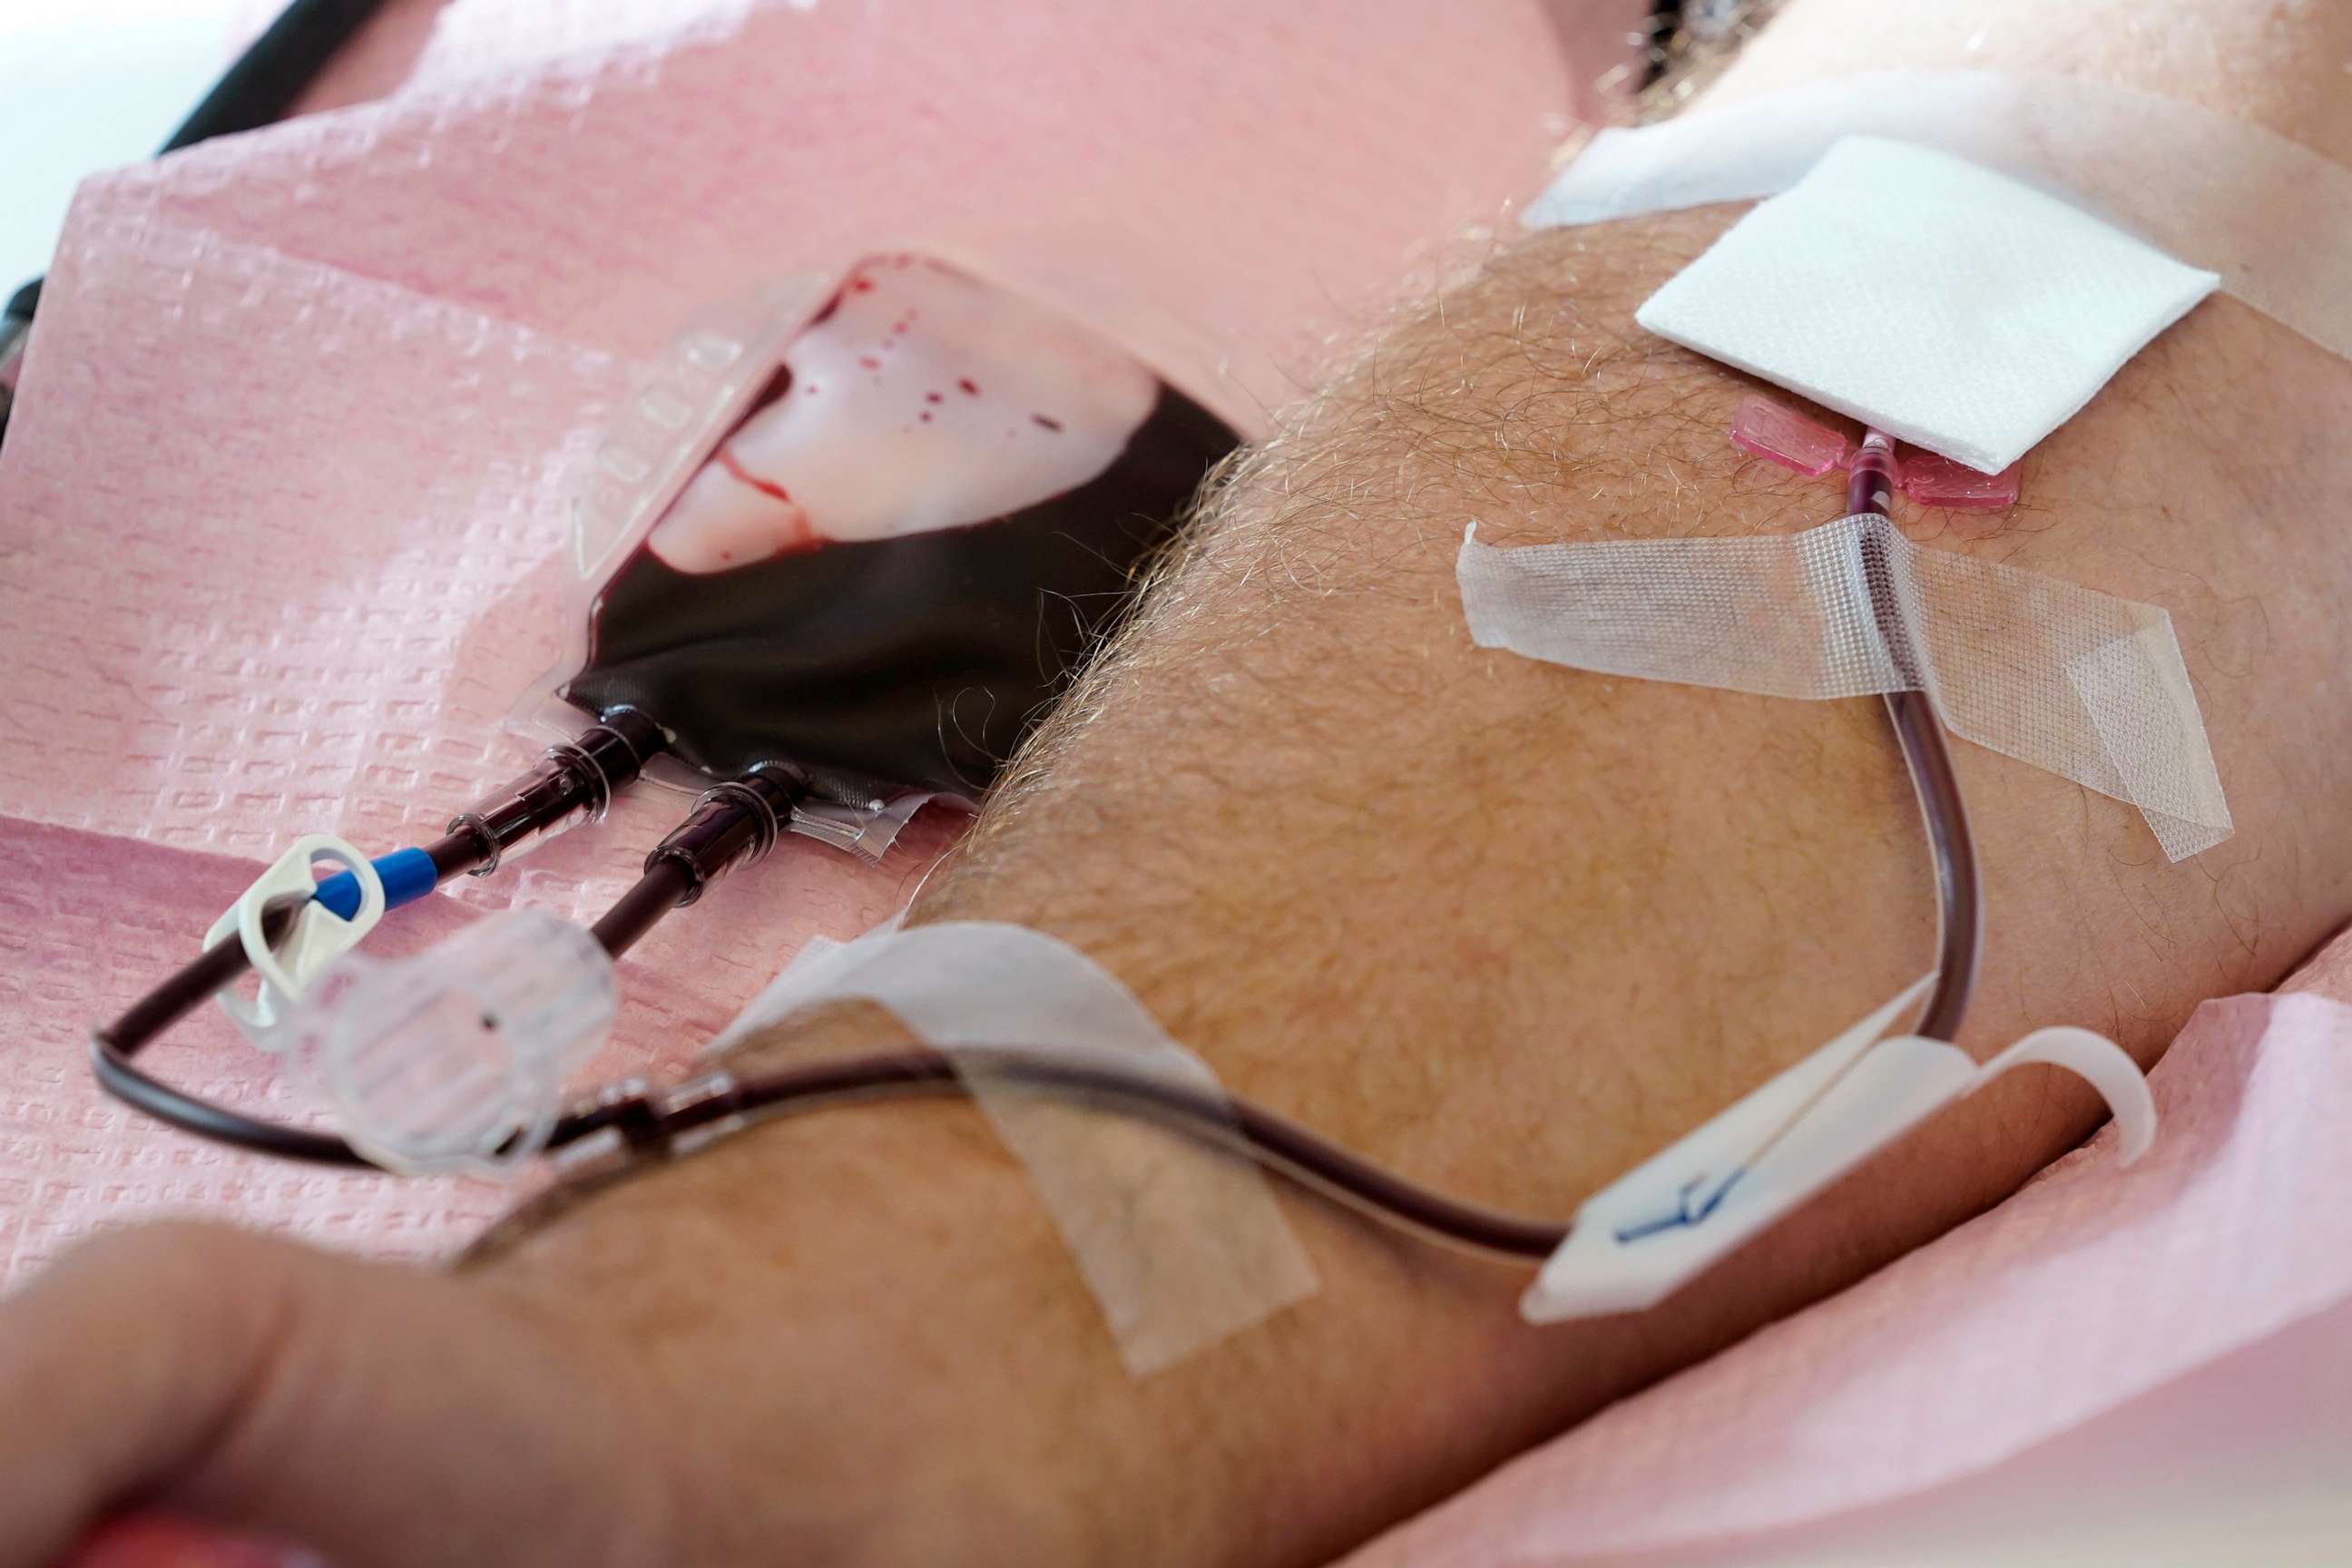 PHOTO: Tubes direct blood from a donor into a bag in Davenport, Iowa, Nov. 11, 2022.